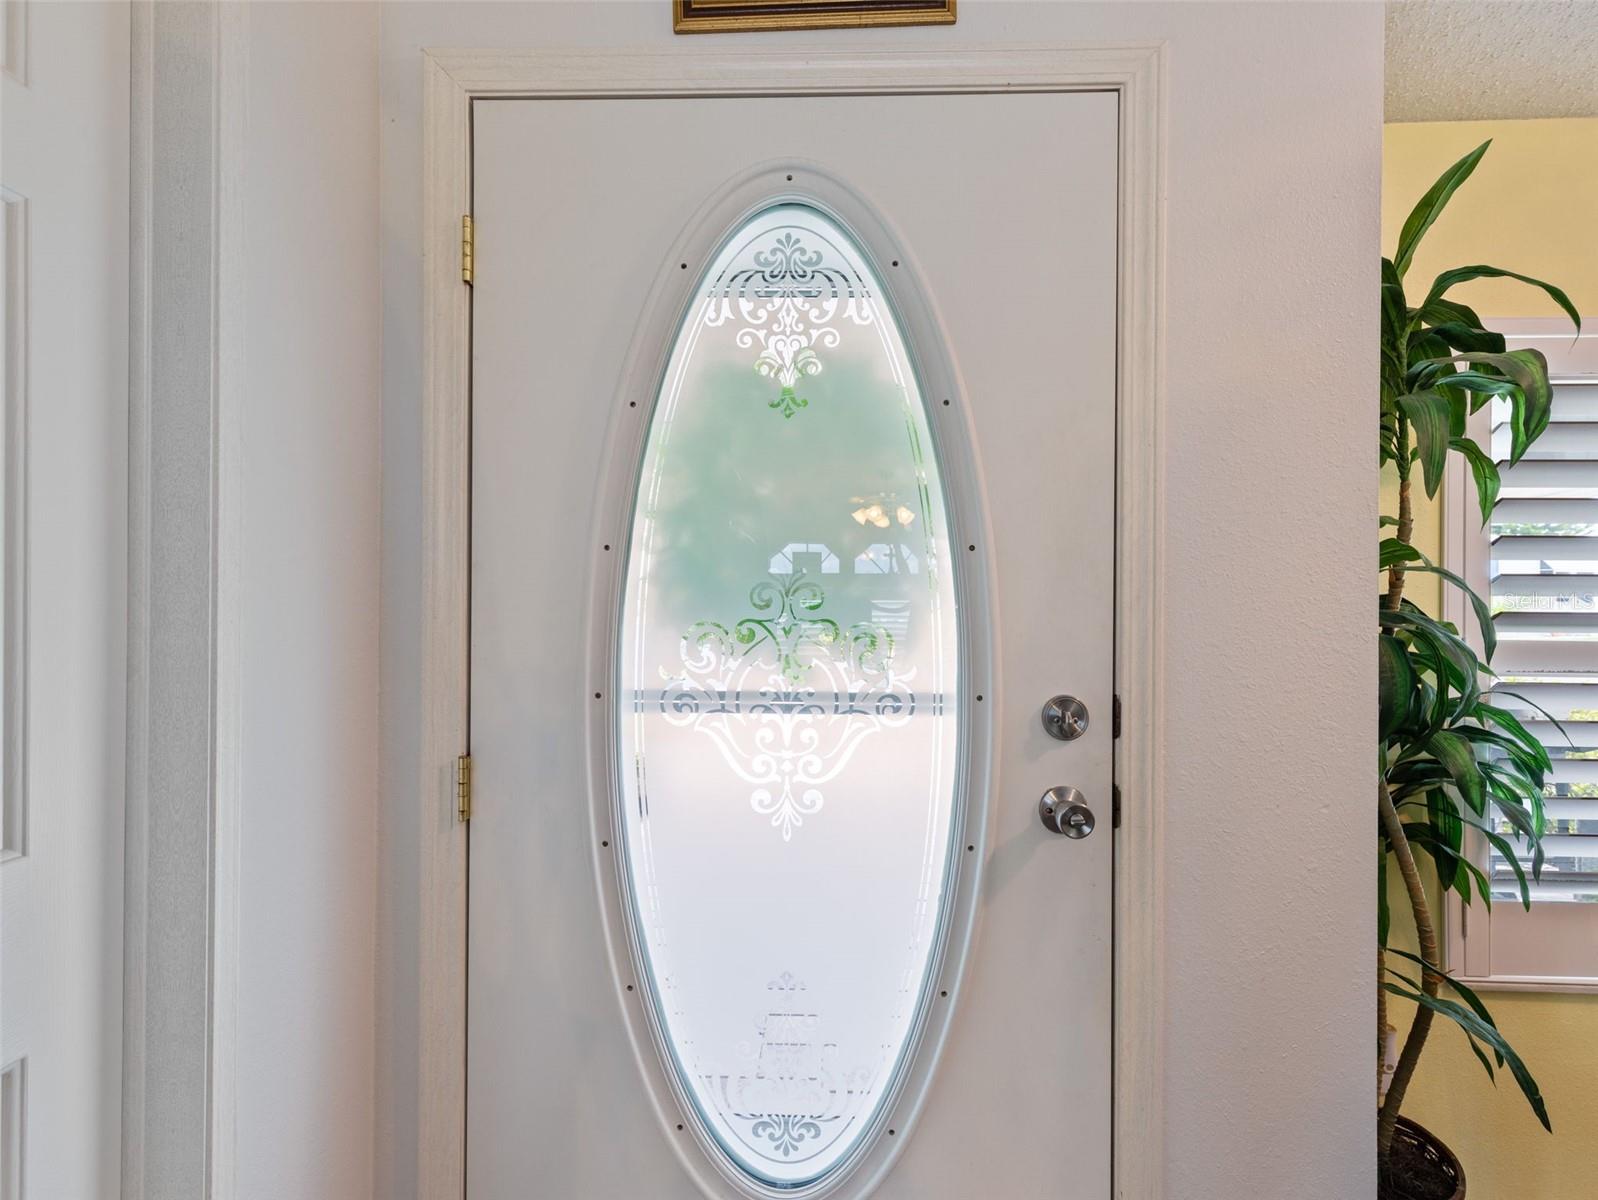 Oval glass door adds more light to the foyer